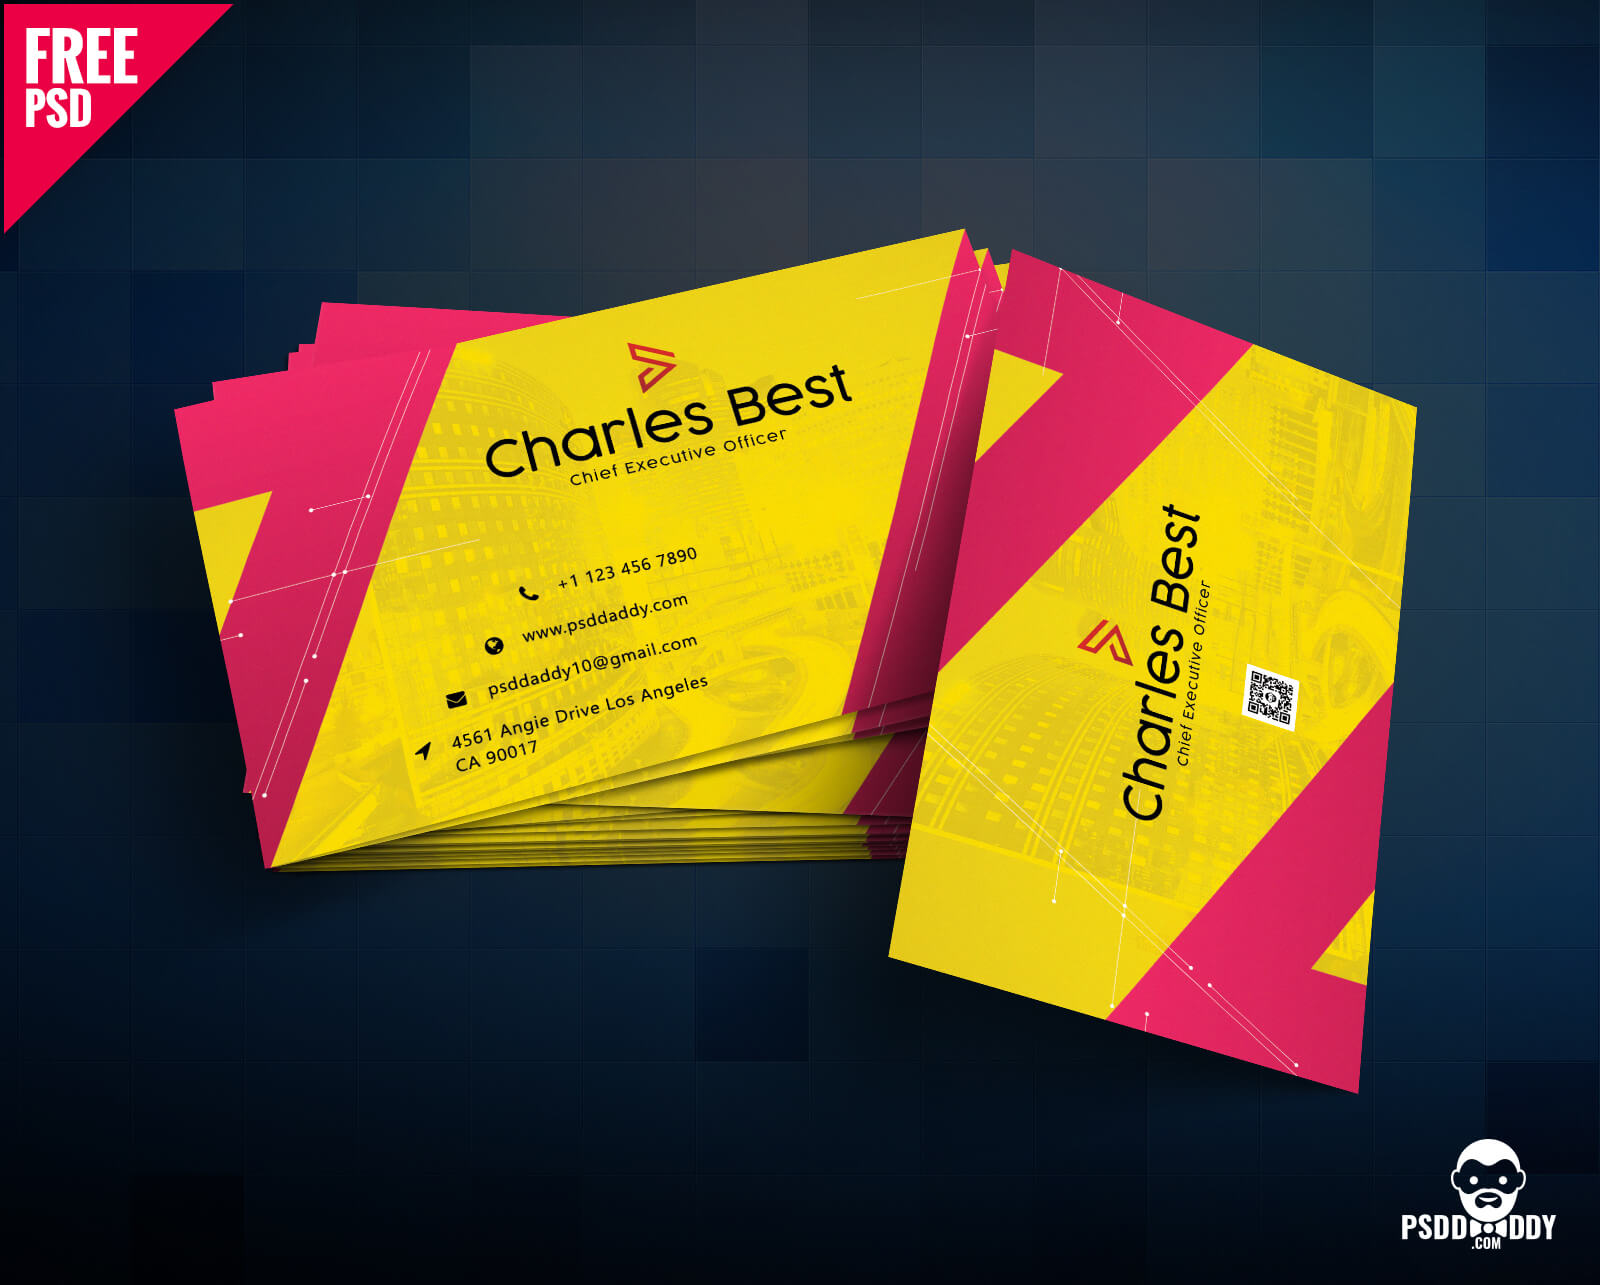 Download] Creative Business Card Free Psd | Psddaddy For Business Card Size Template Psd